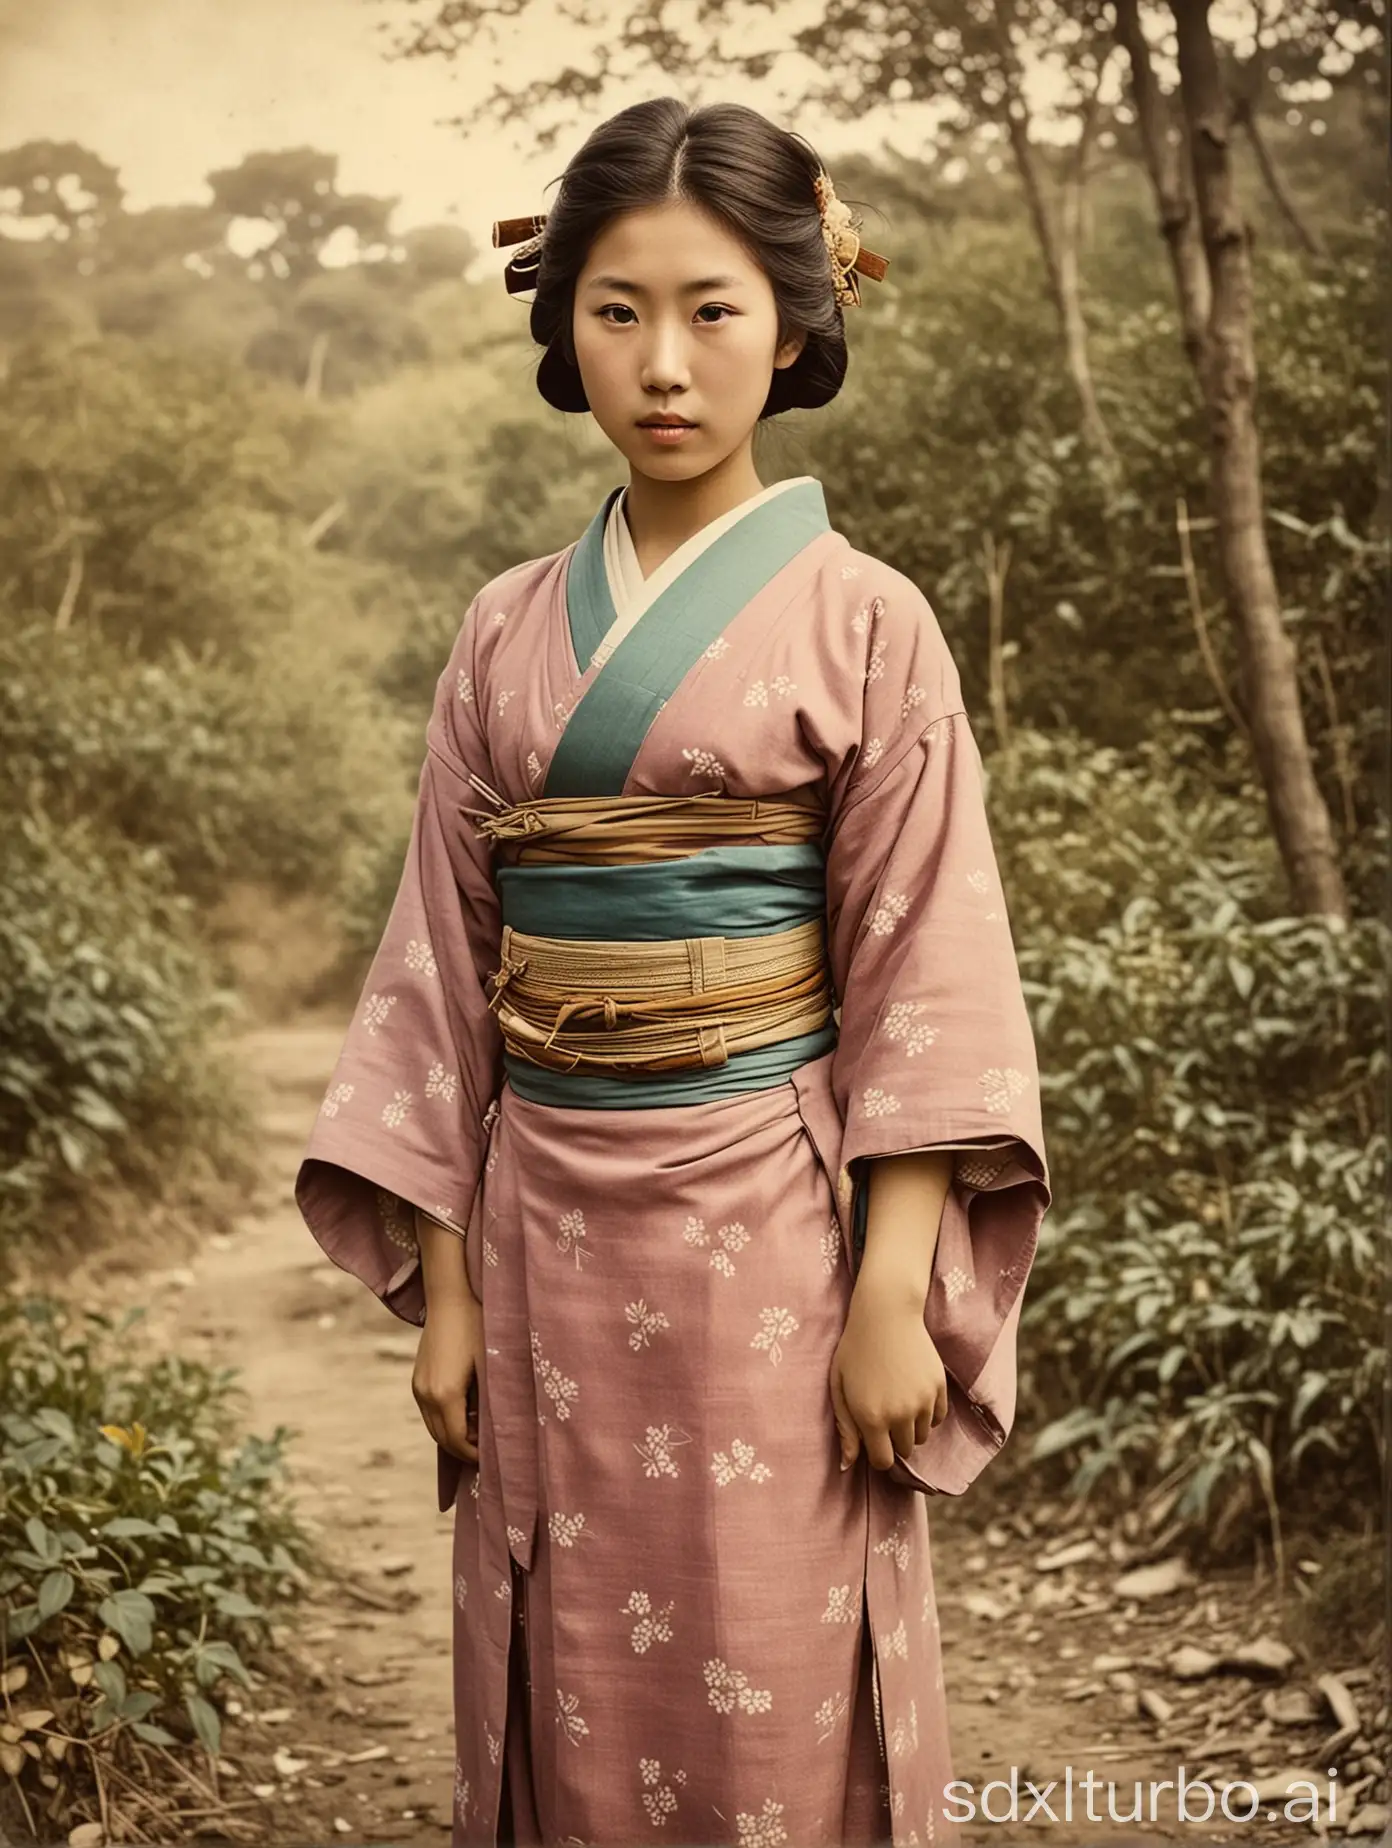 Colorized-Vintage-Photograph-of-a-Rural-Japanese-Girl-from-circa-1867